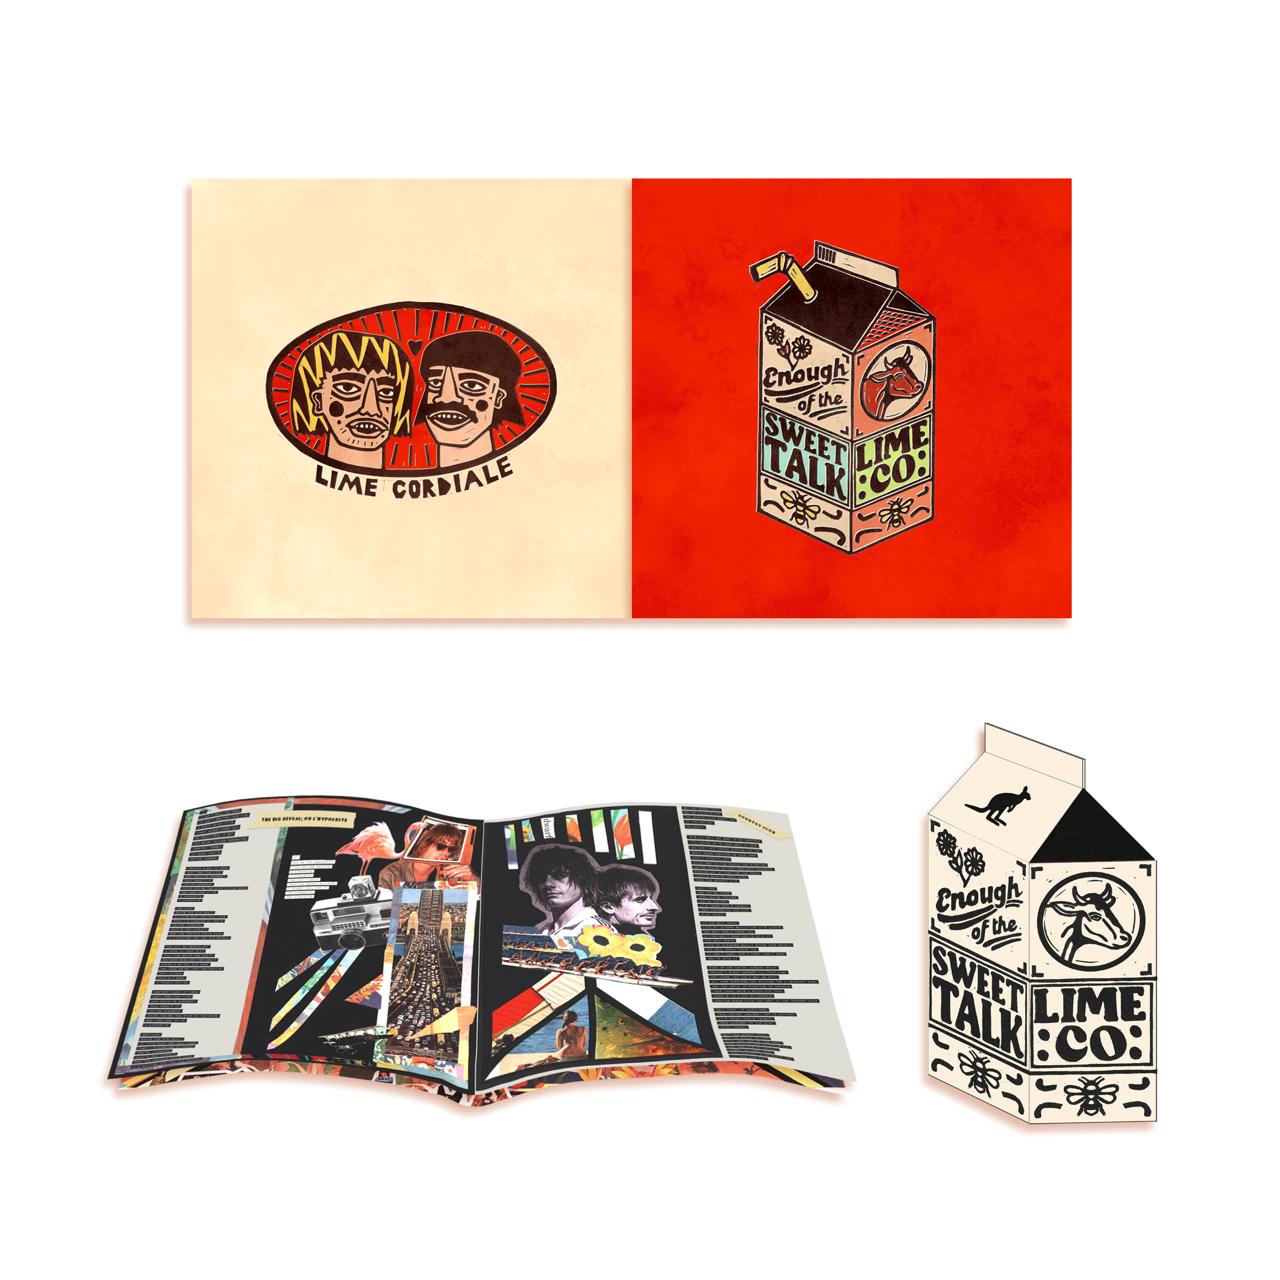 Pre-Order Enough of the Sweet Talk ECOVIN LP including Exclusive Lyric Book